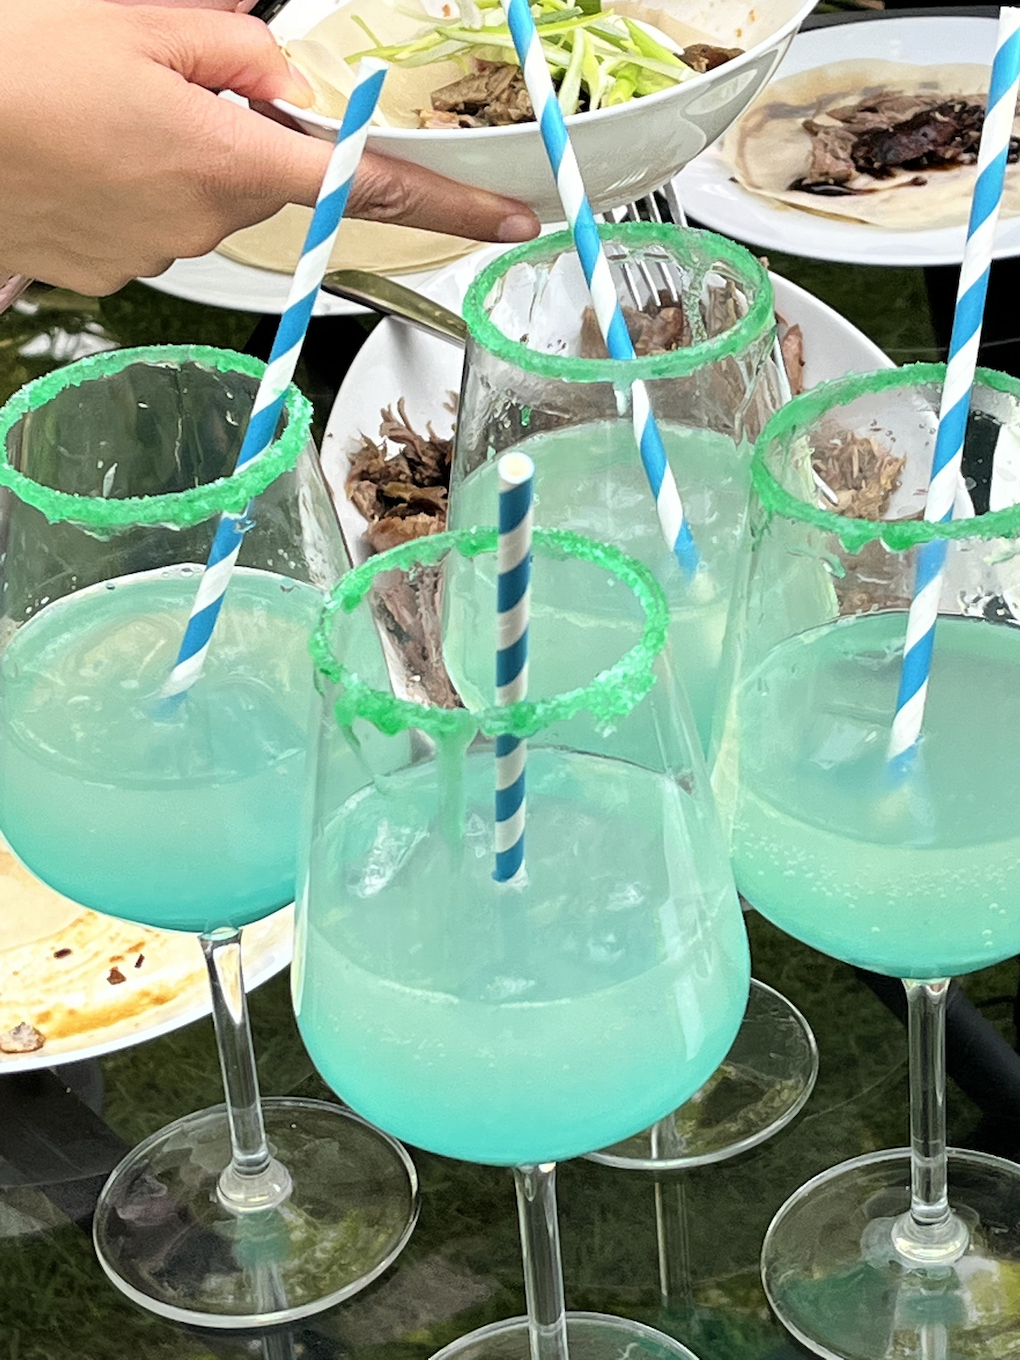 Four palmoas in cocktail glasses in front of some food.